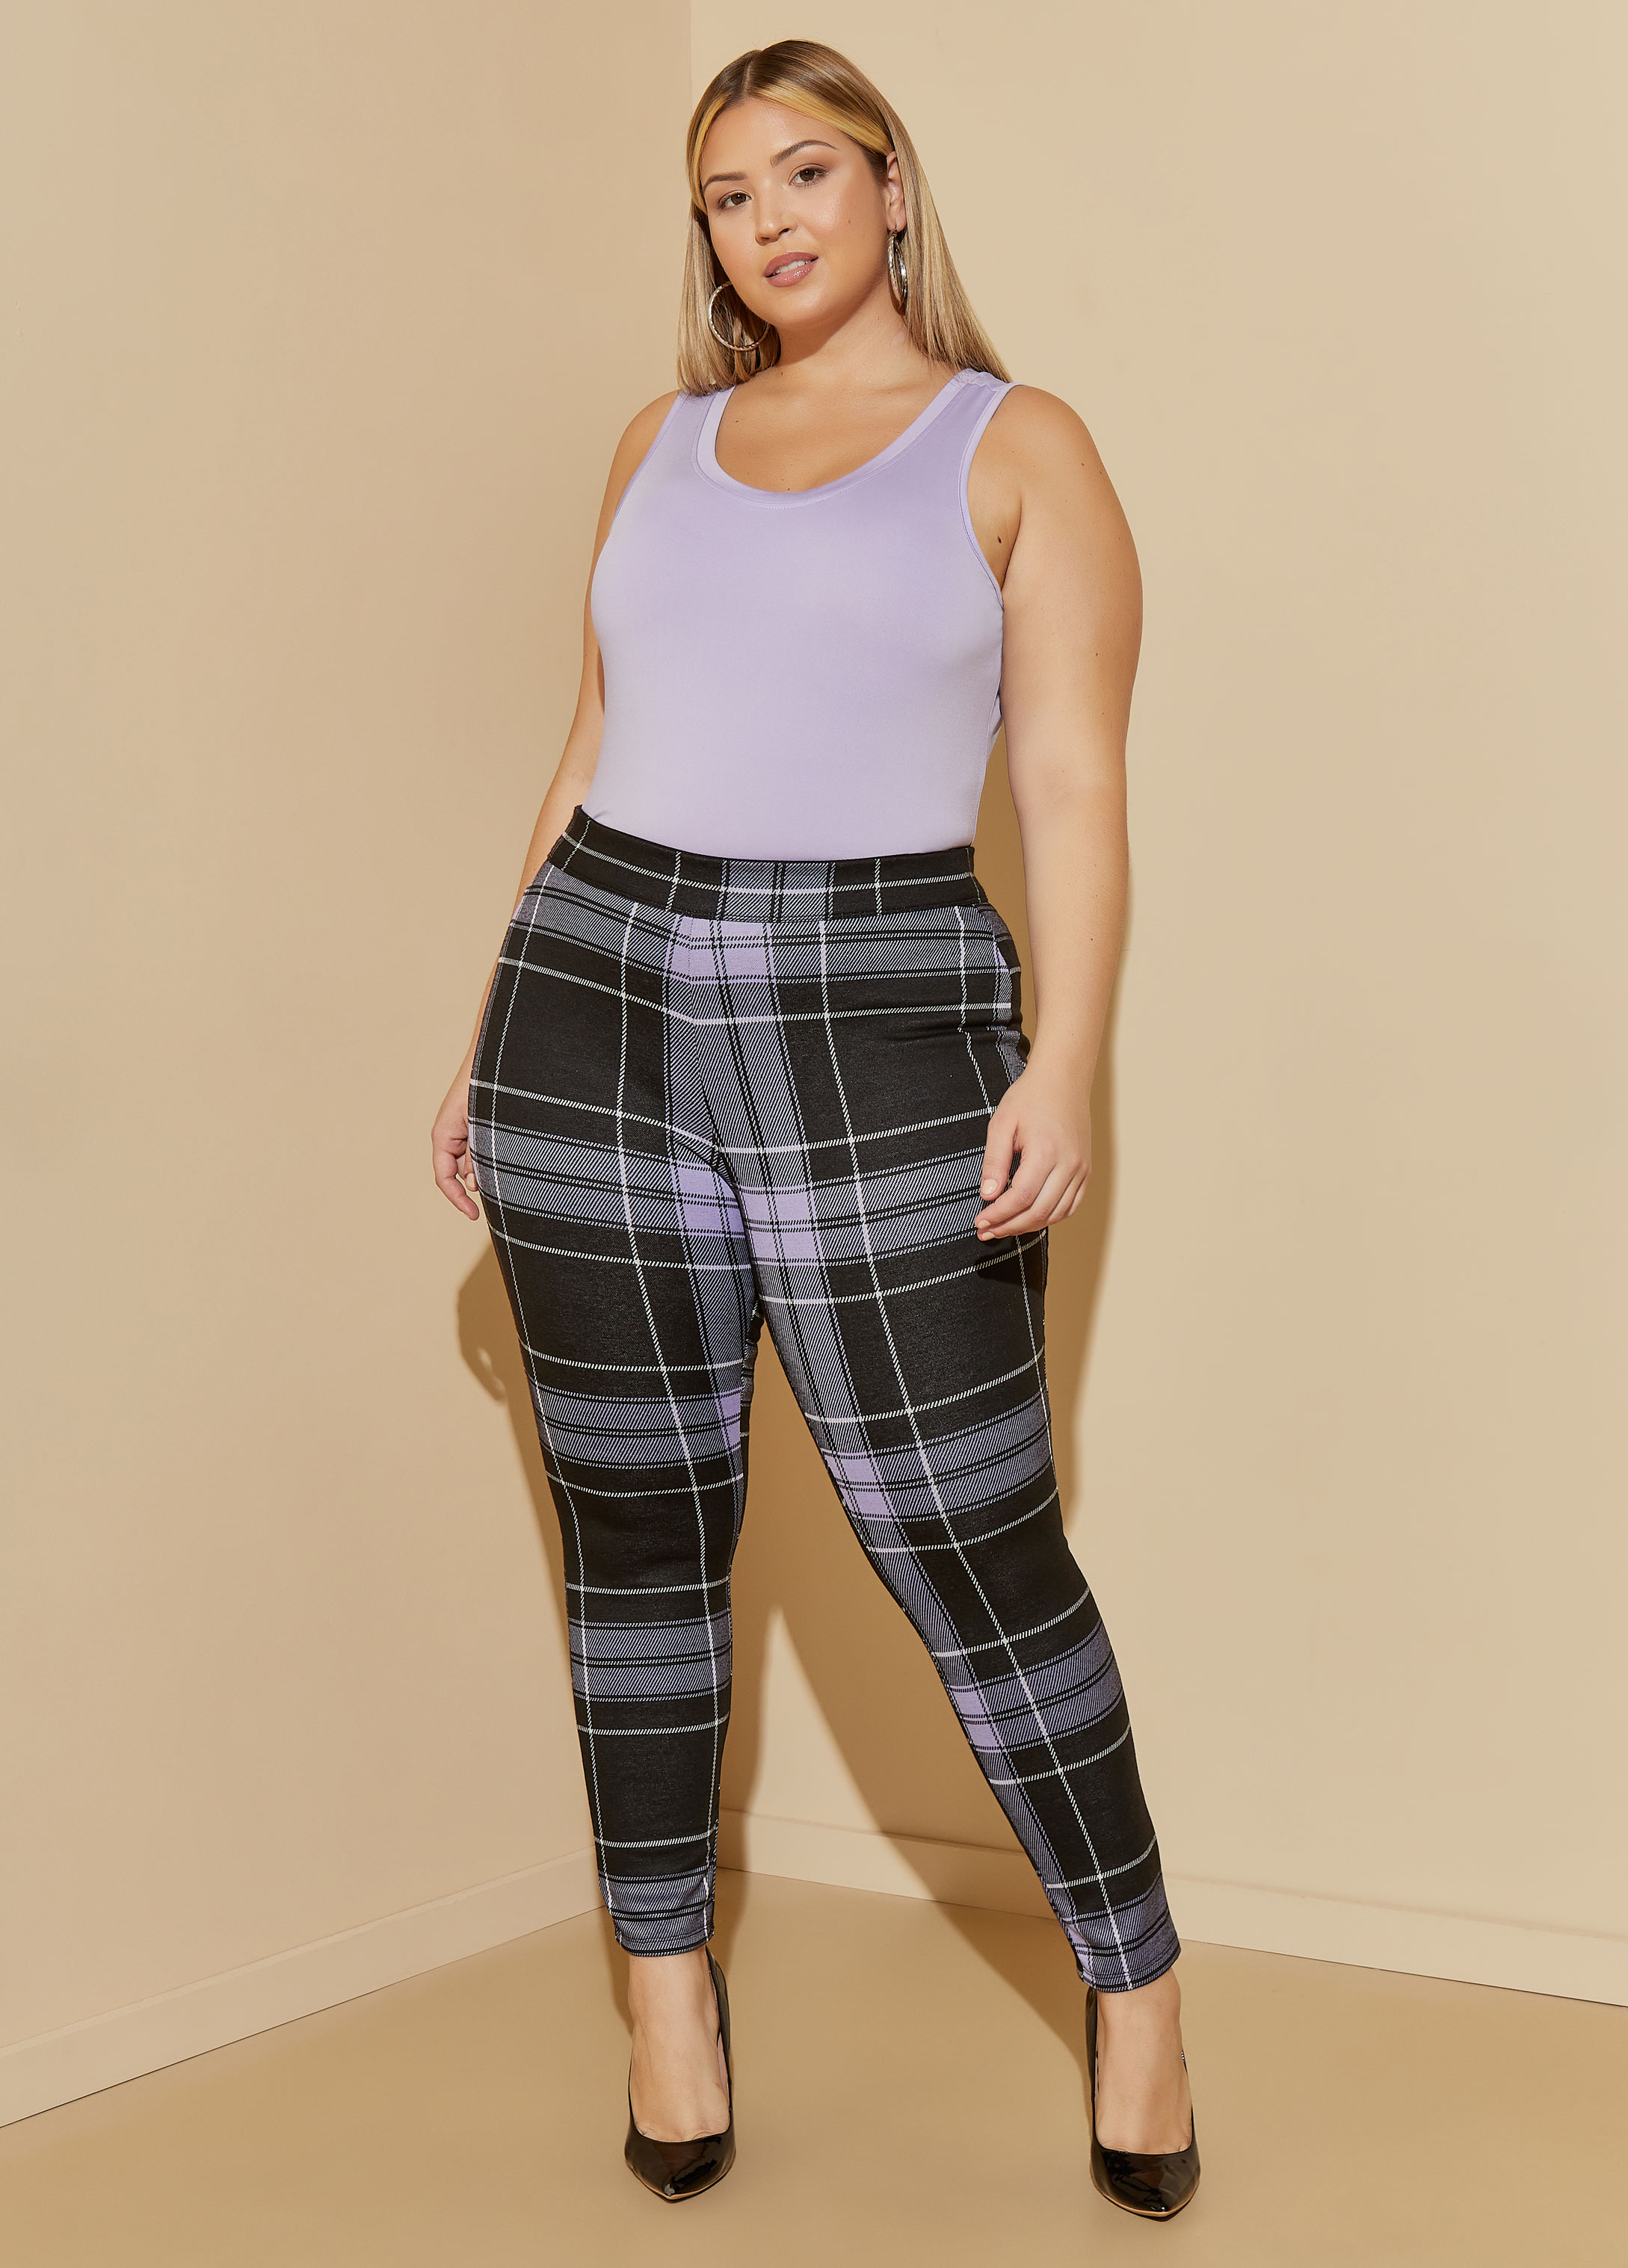 Buttery Smooth Modish Plaid Extra Plus Size Leggings - 3X-5X